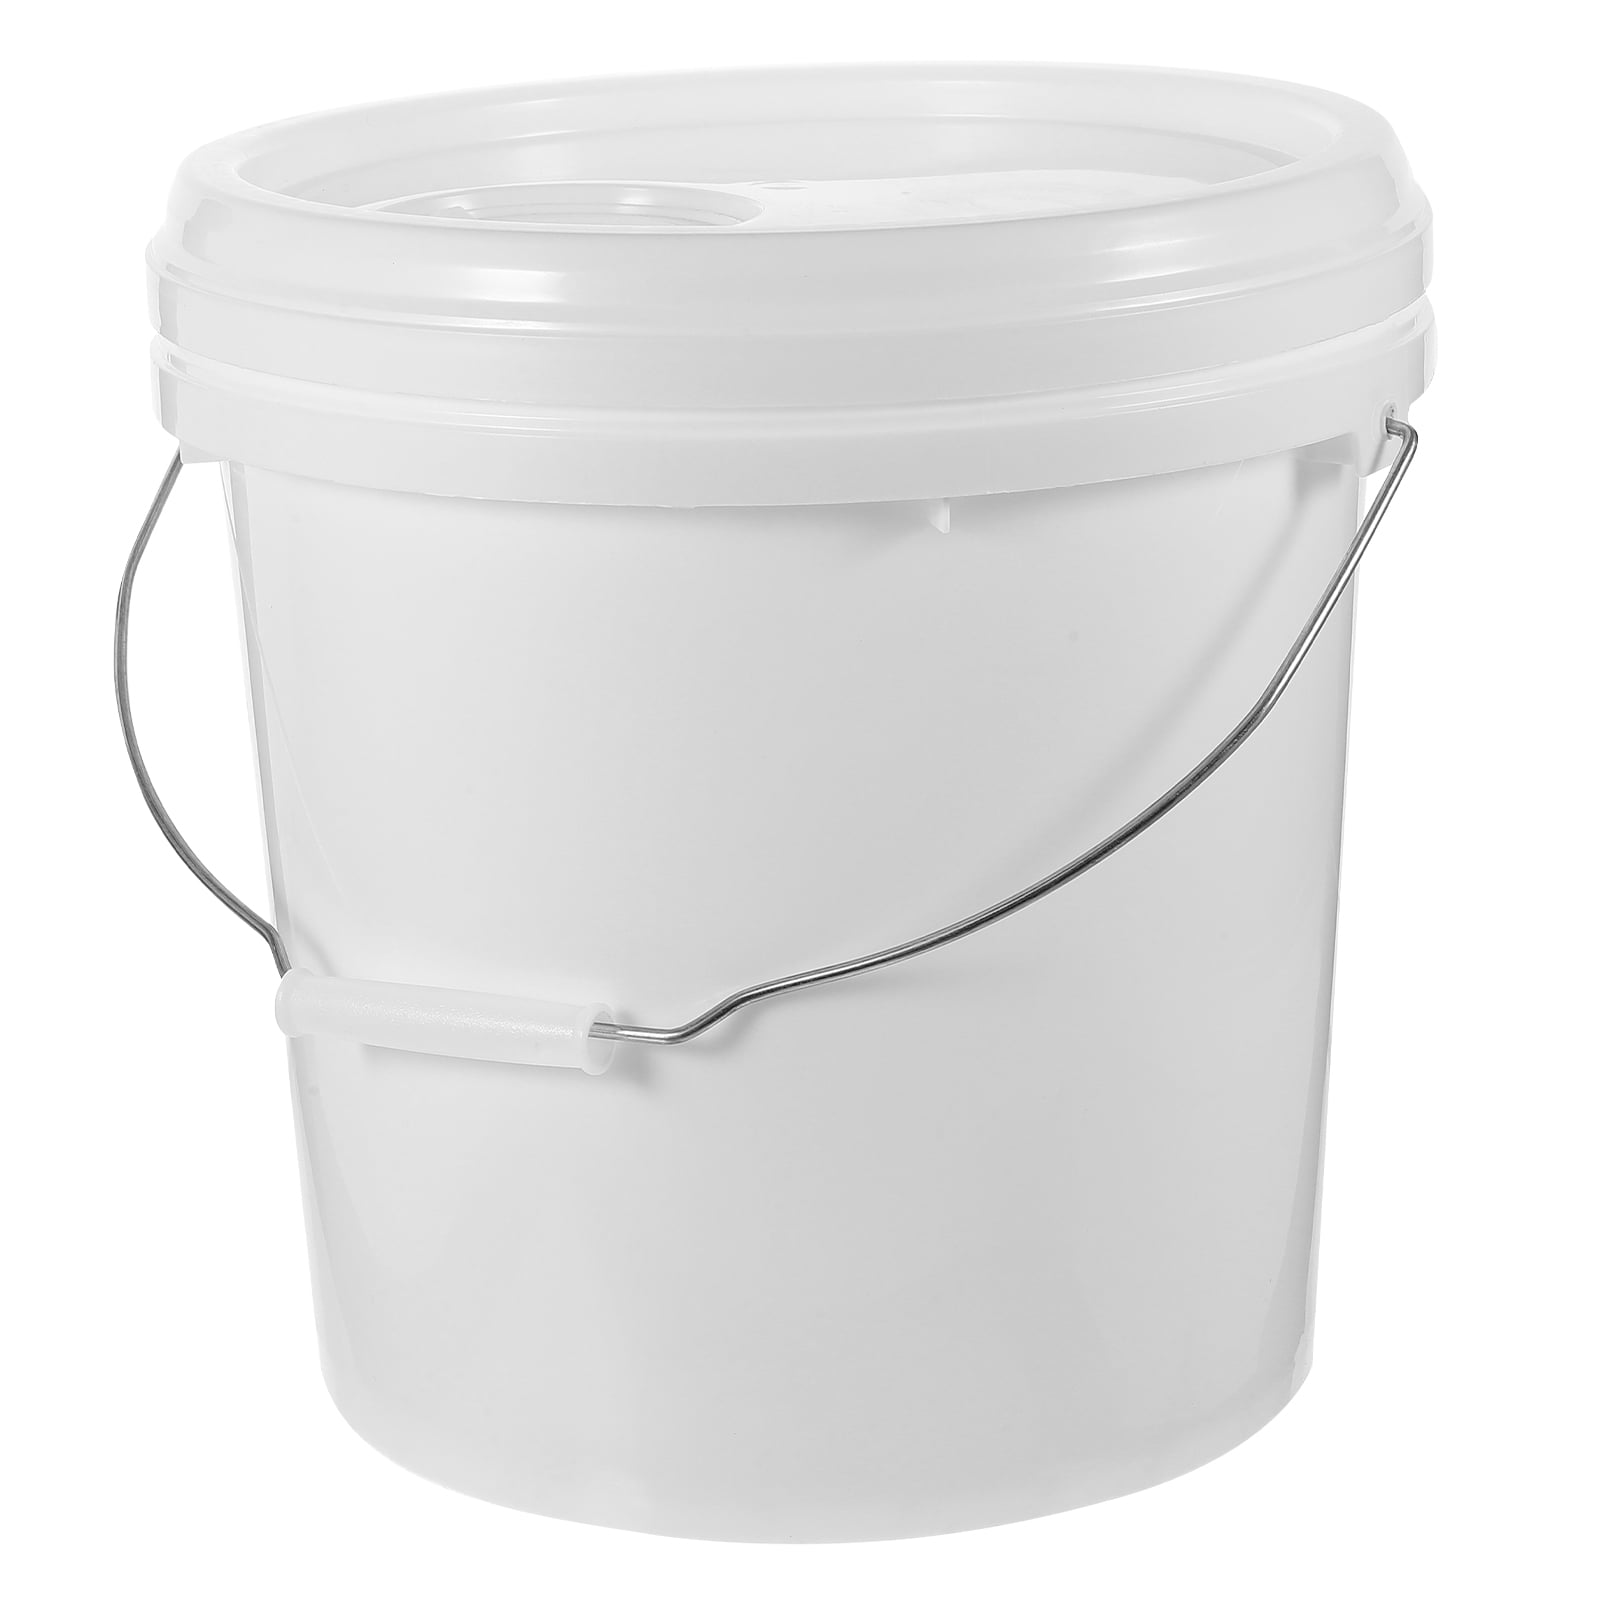 The Brush Man 5-Gallon White Plastic Pail With Handle PAIL-5 GAL-W